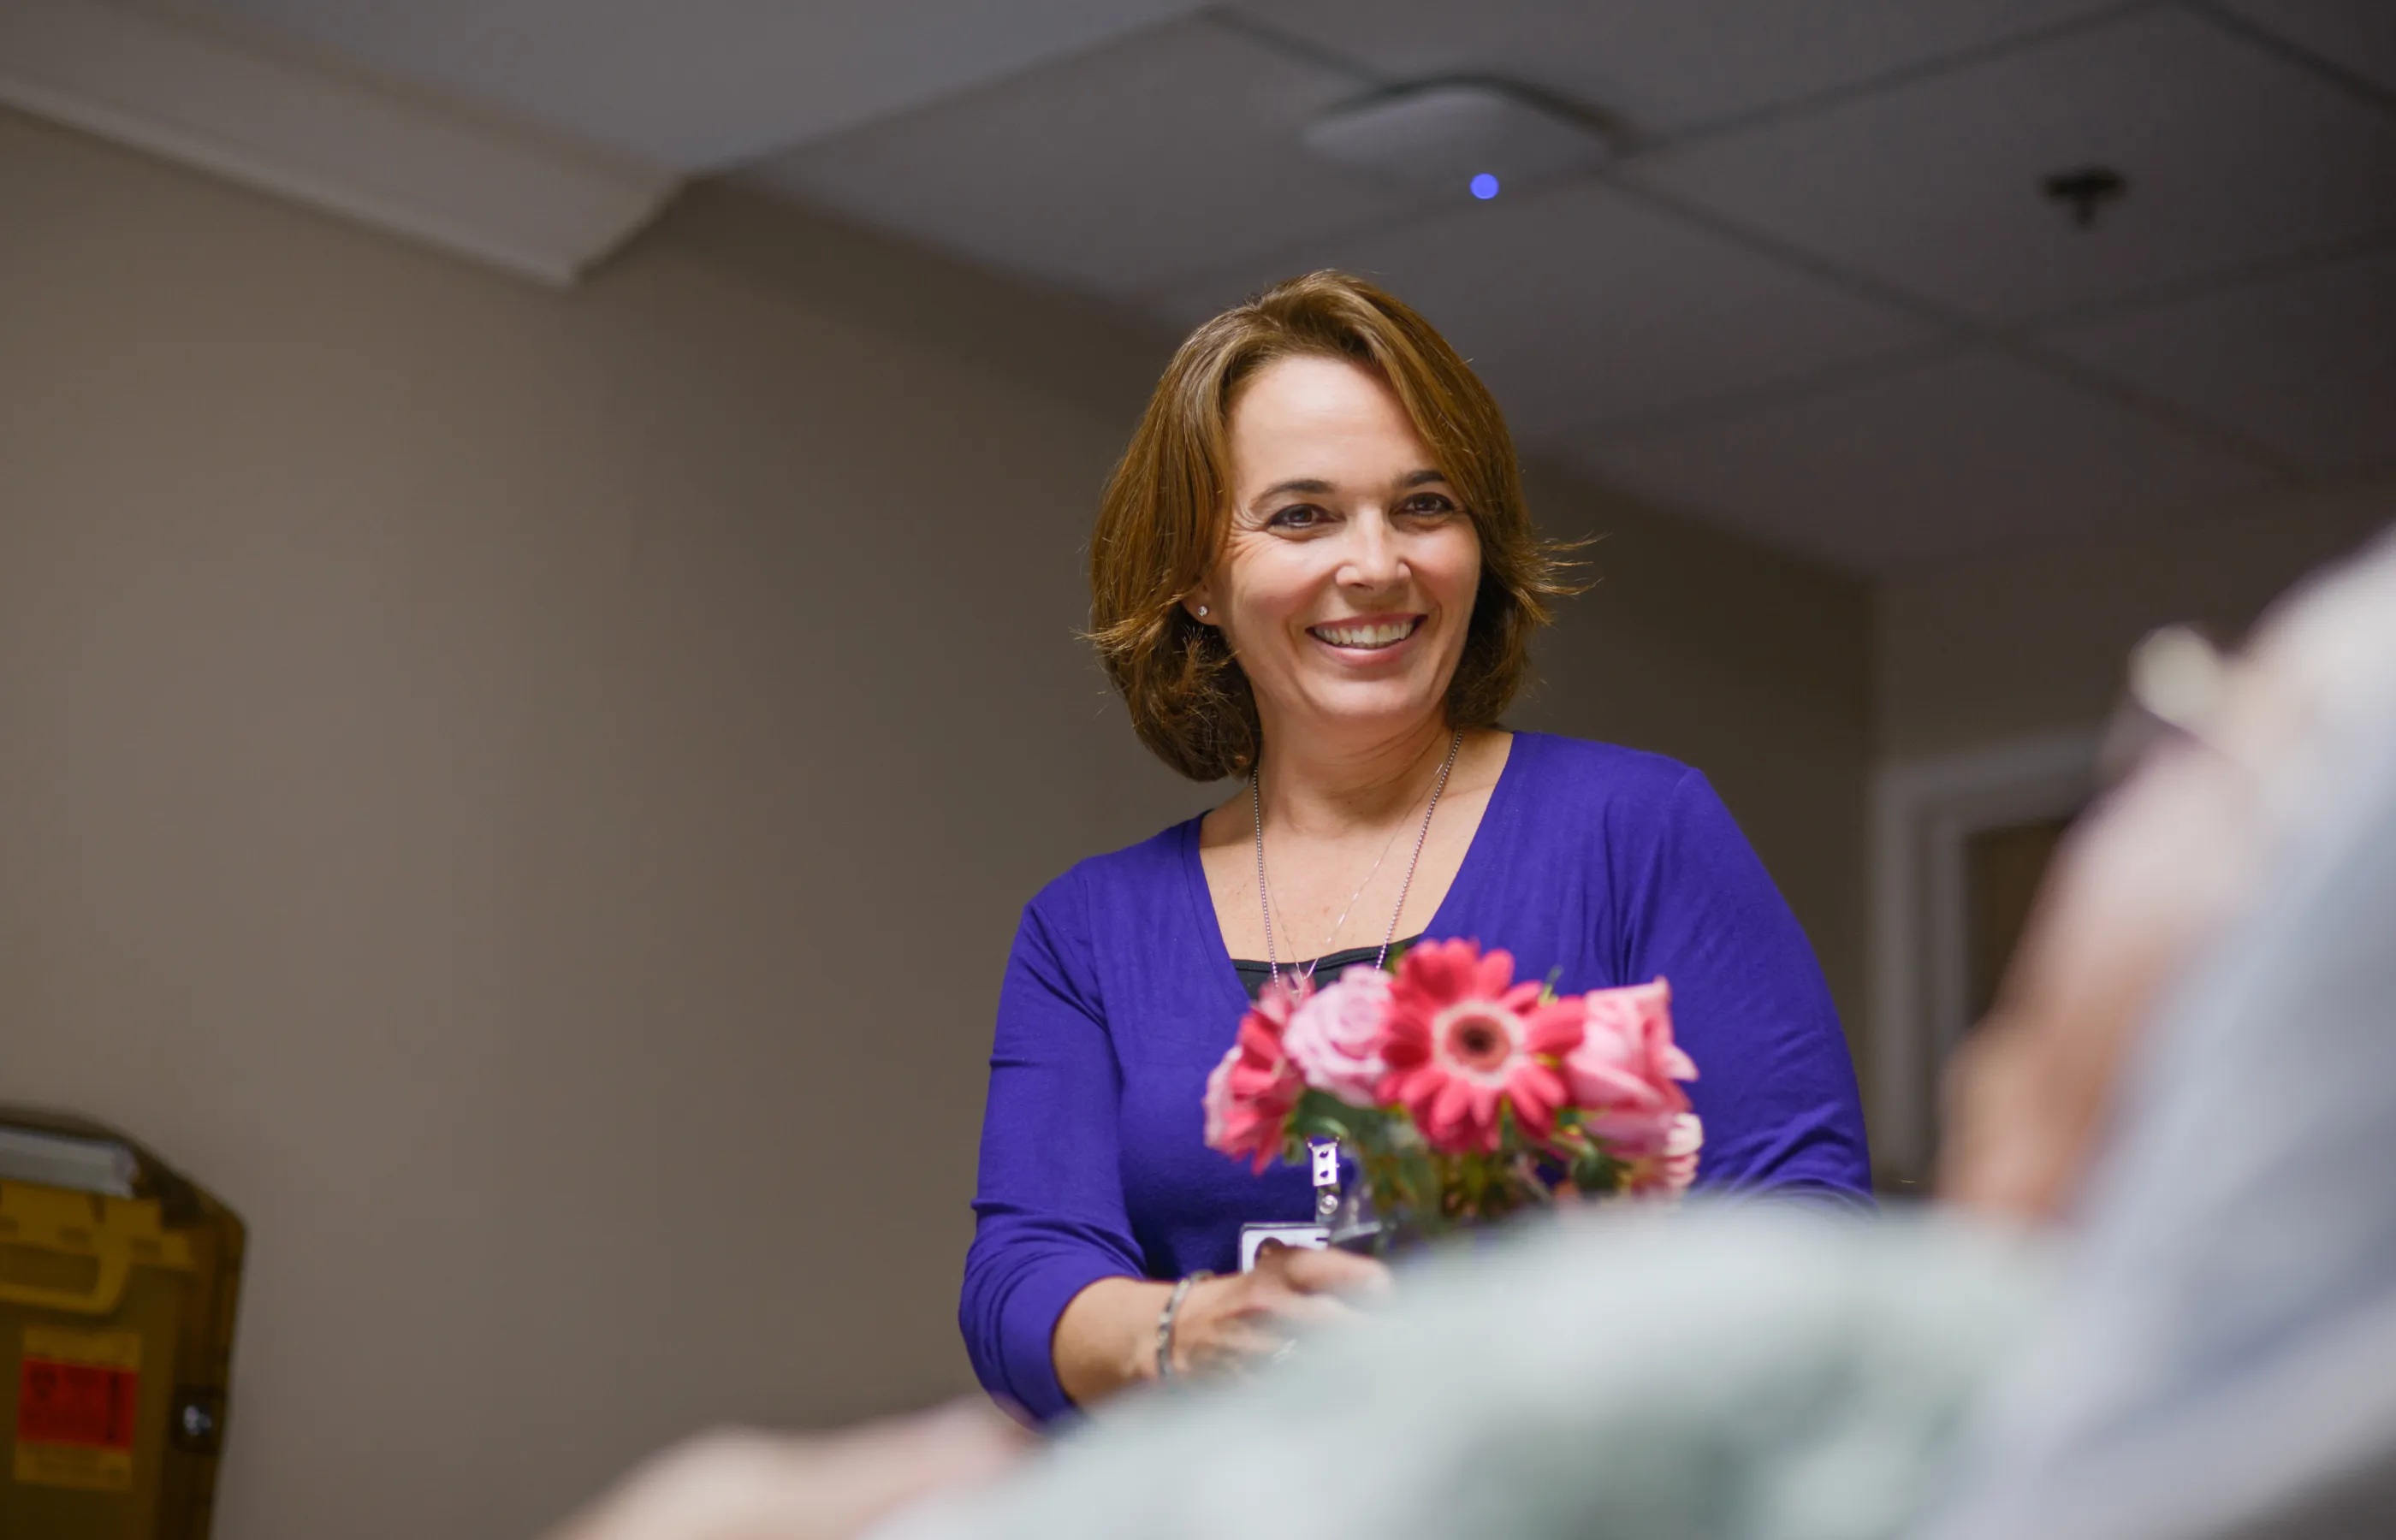 A team member is delivering flowers to a patient.